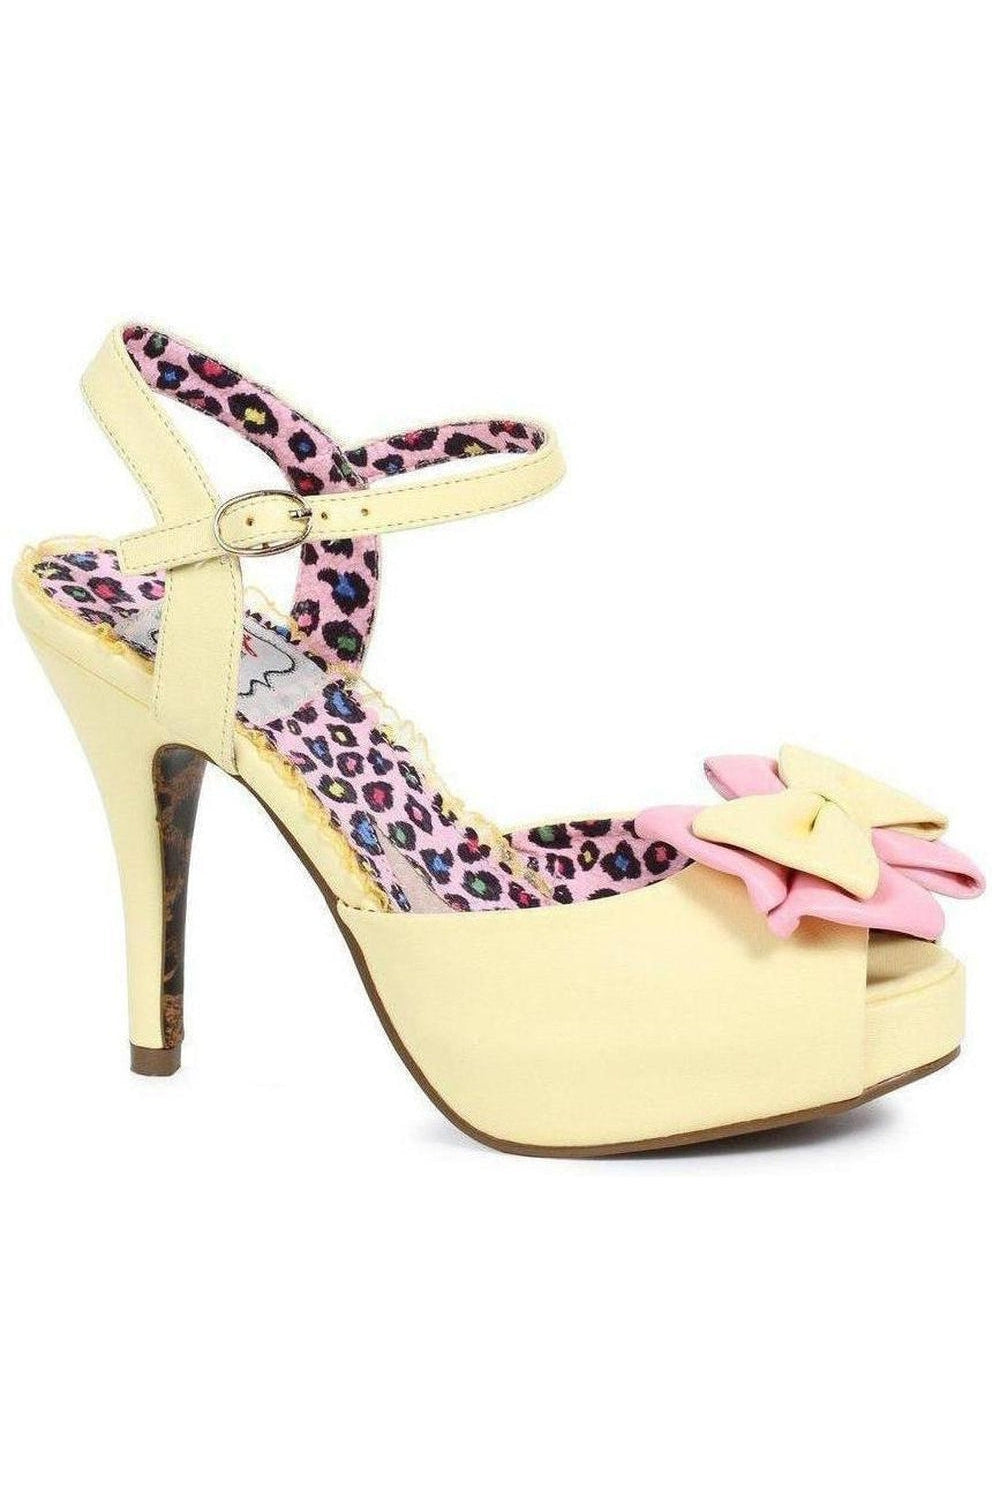 BP412-VIXEN | Yellow Faux Leather-Bettie Page by Ellie-SEXYSHOES.COM